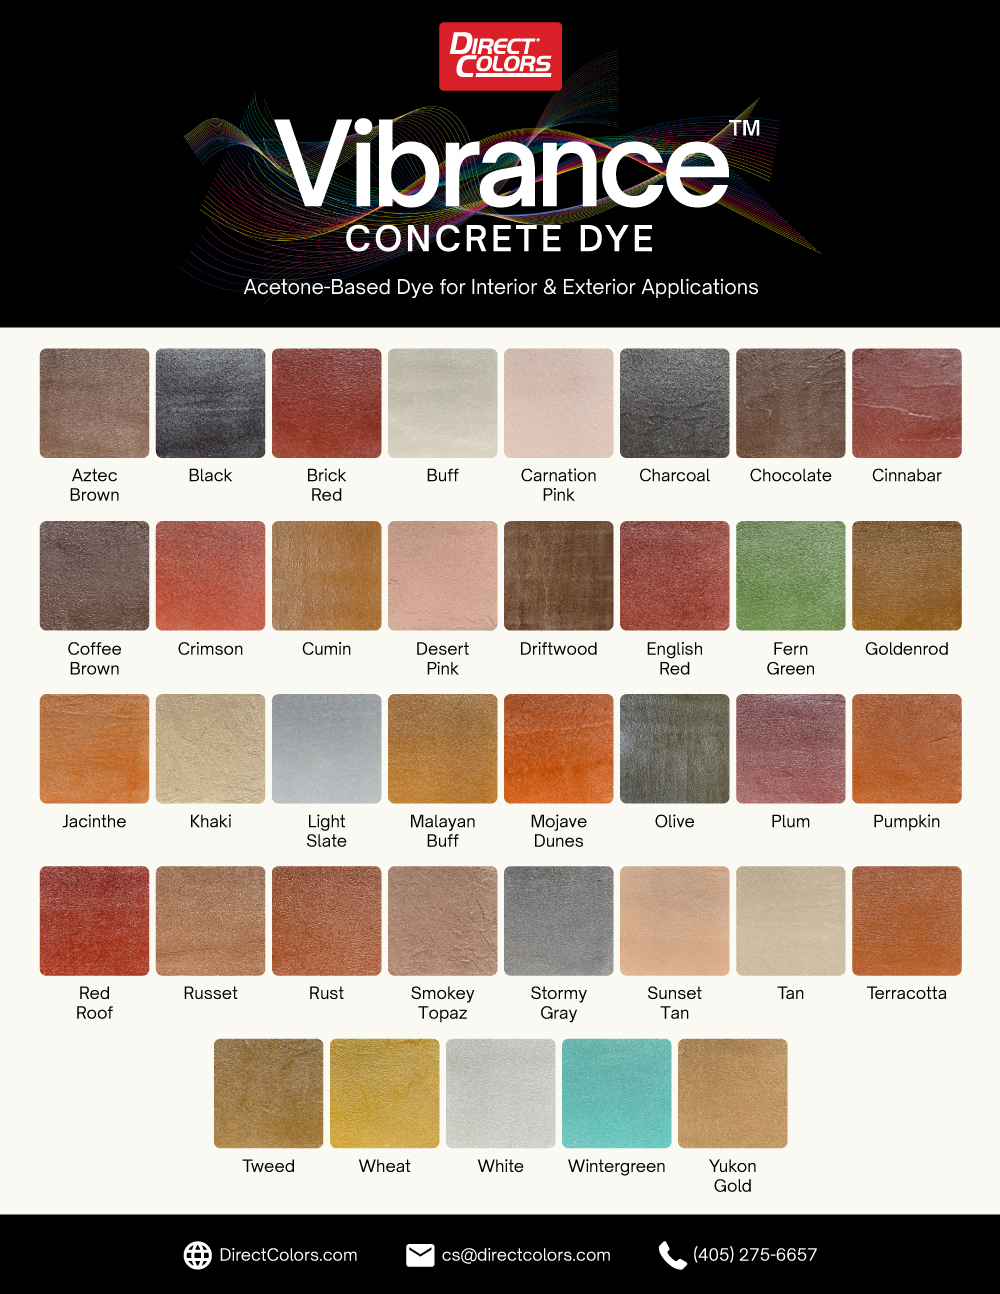 Concrete Dye - Highly Rated Integral Concrete Color Pigment Dye